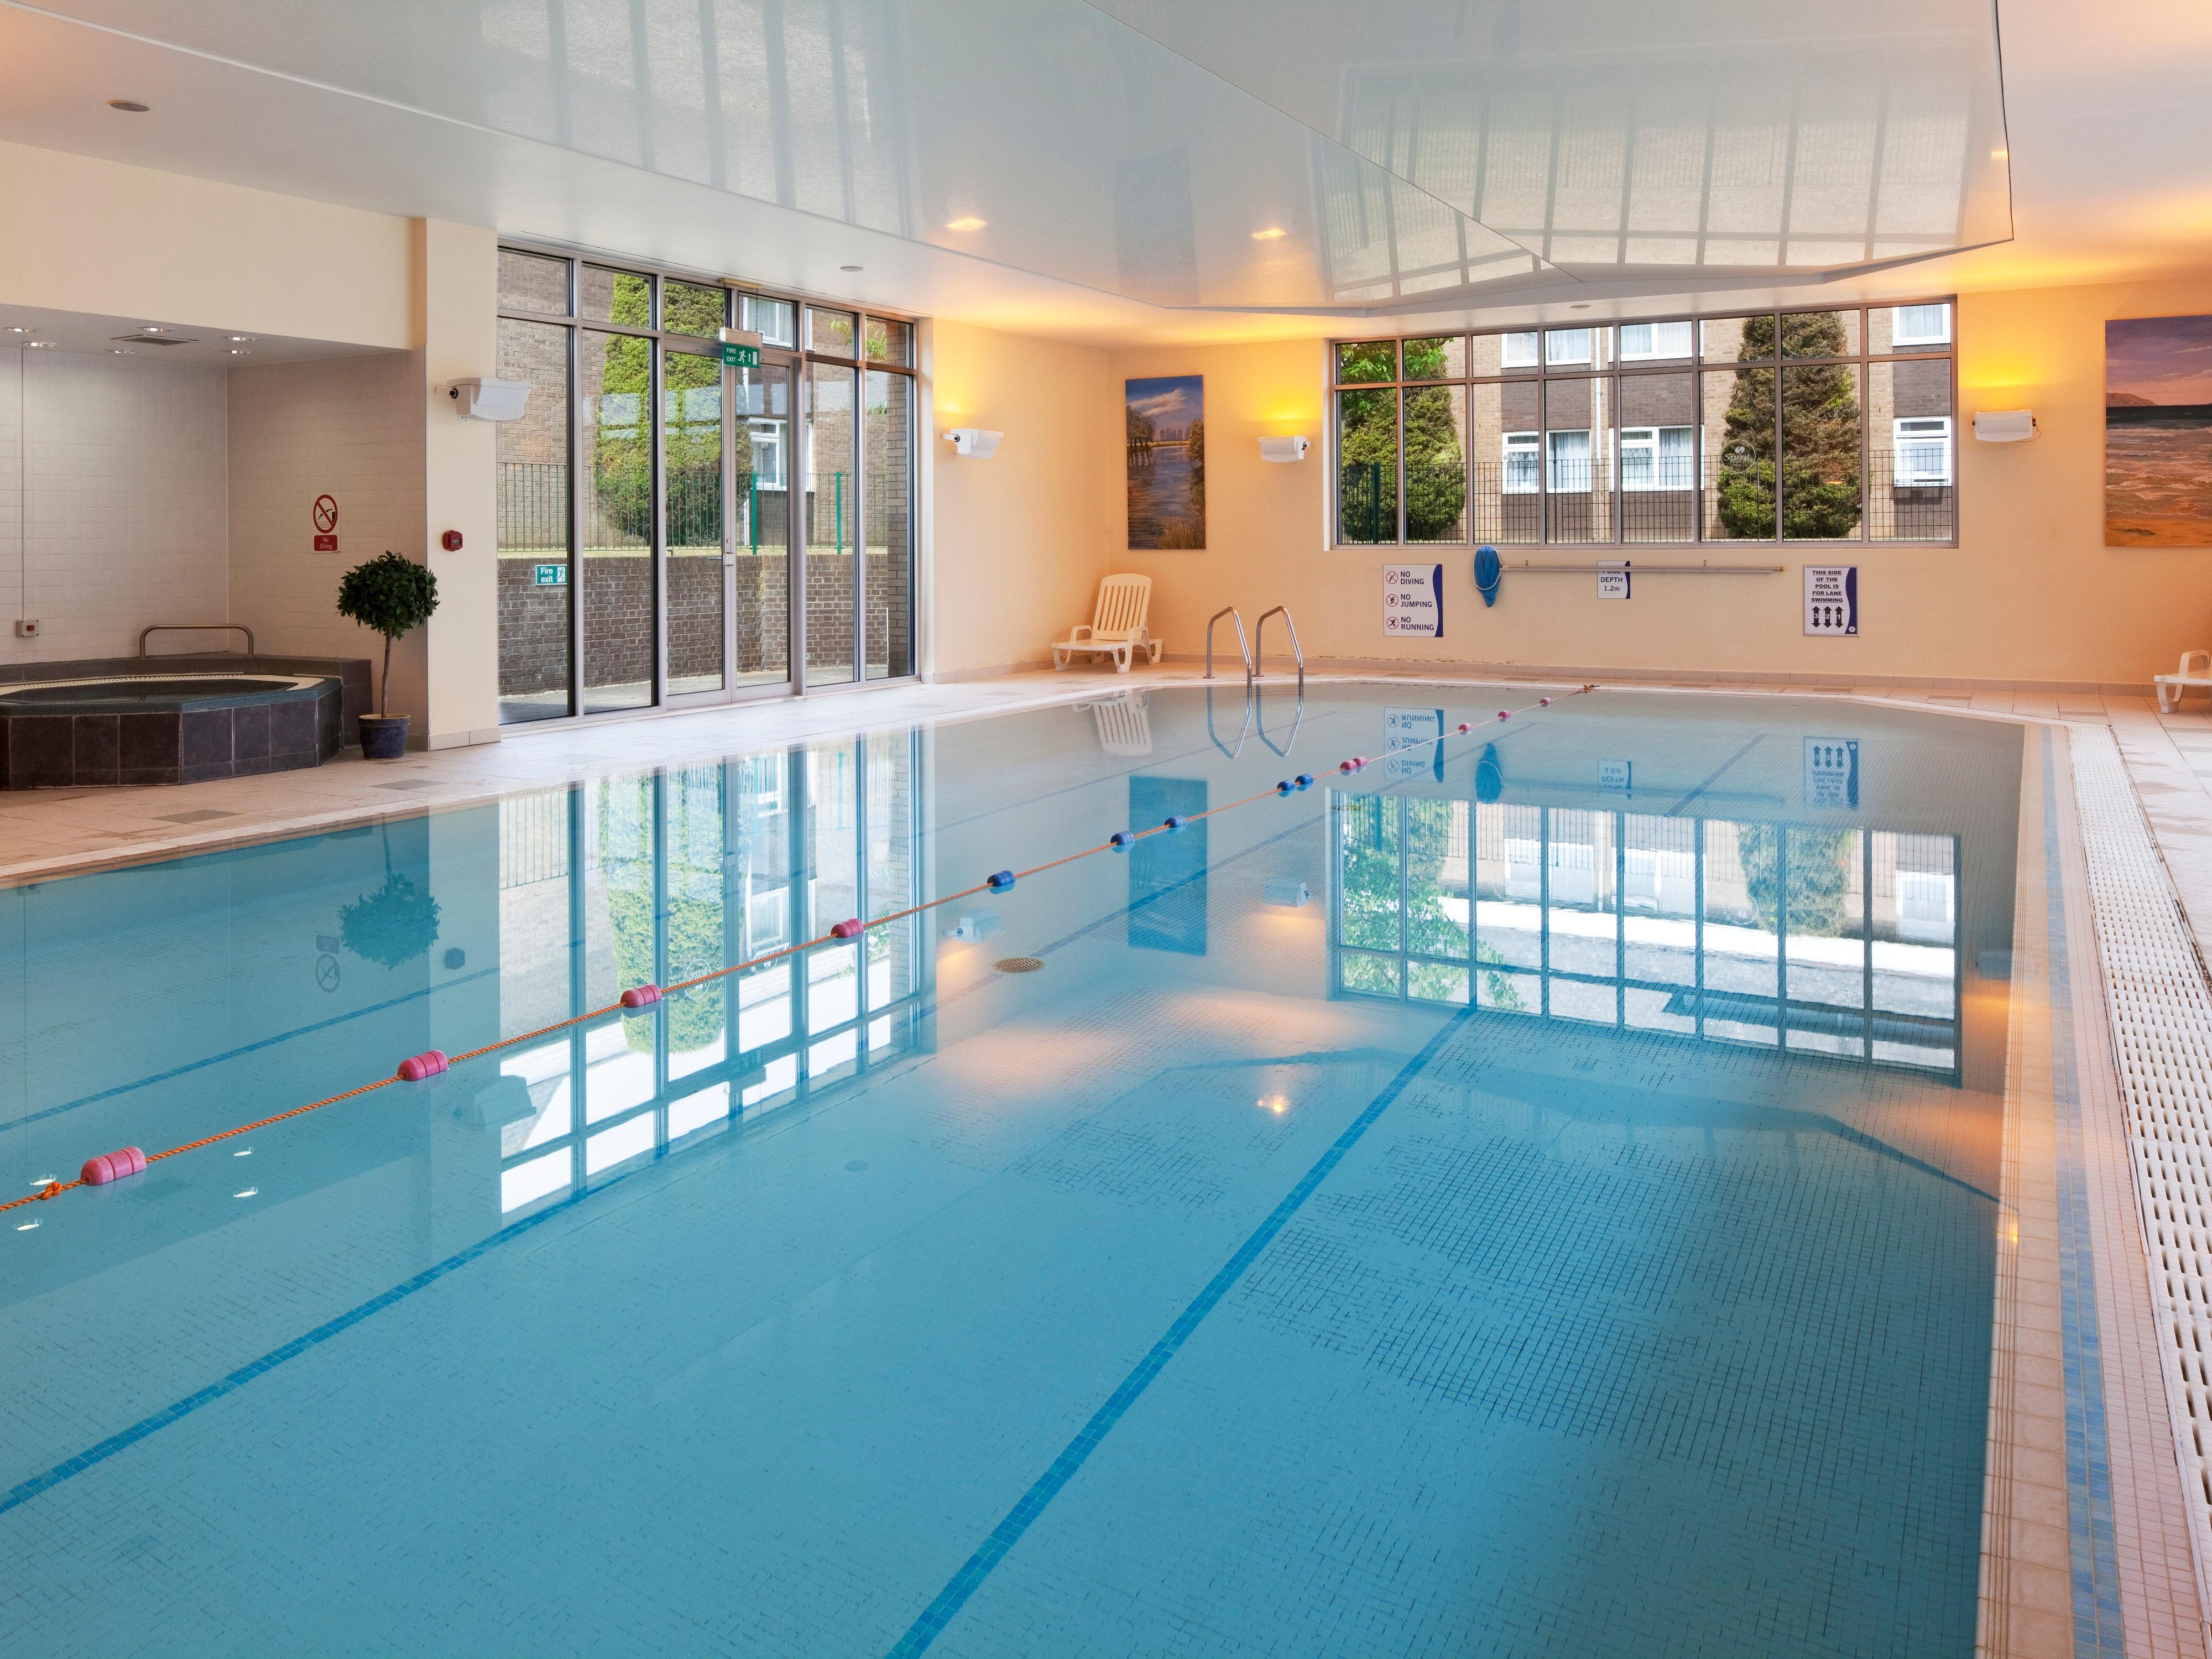 Stay in shape during your stay at the Holiday Inn Ipswich with a visit to our You Fit Health Club dedicated fitness centre. Our health club includes a fully-equipped gymnasium, a heated swimming pool, a hot tub, a steam room and a sauna.